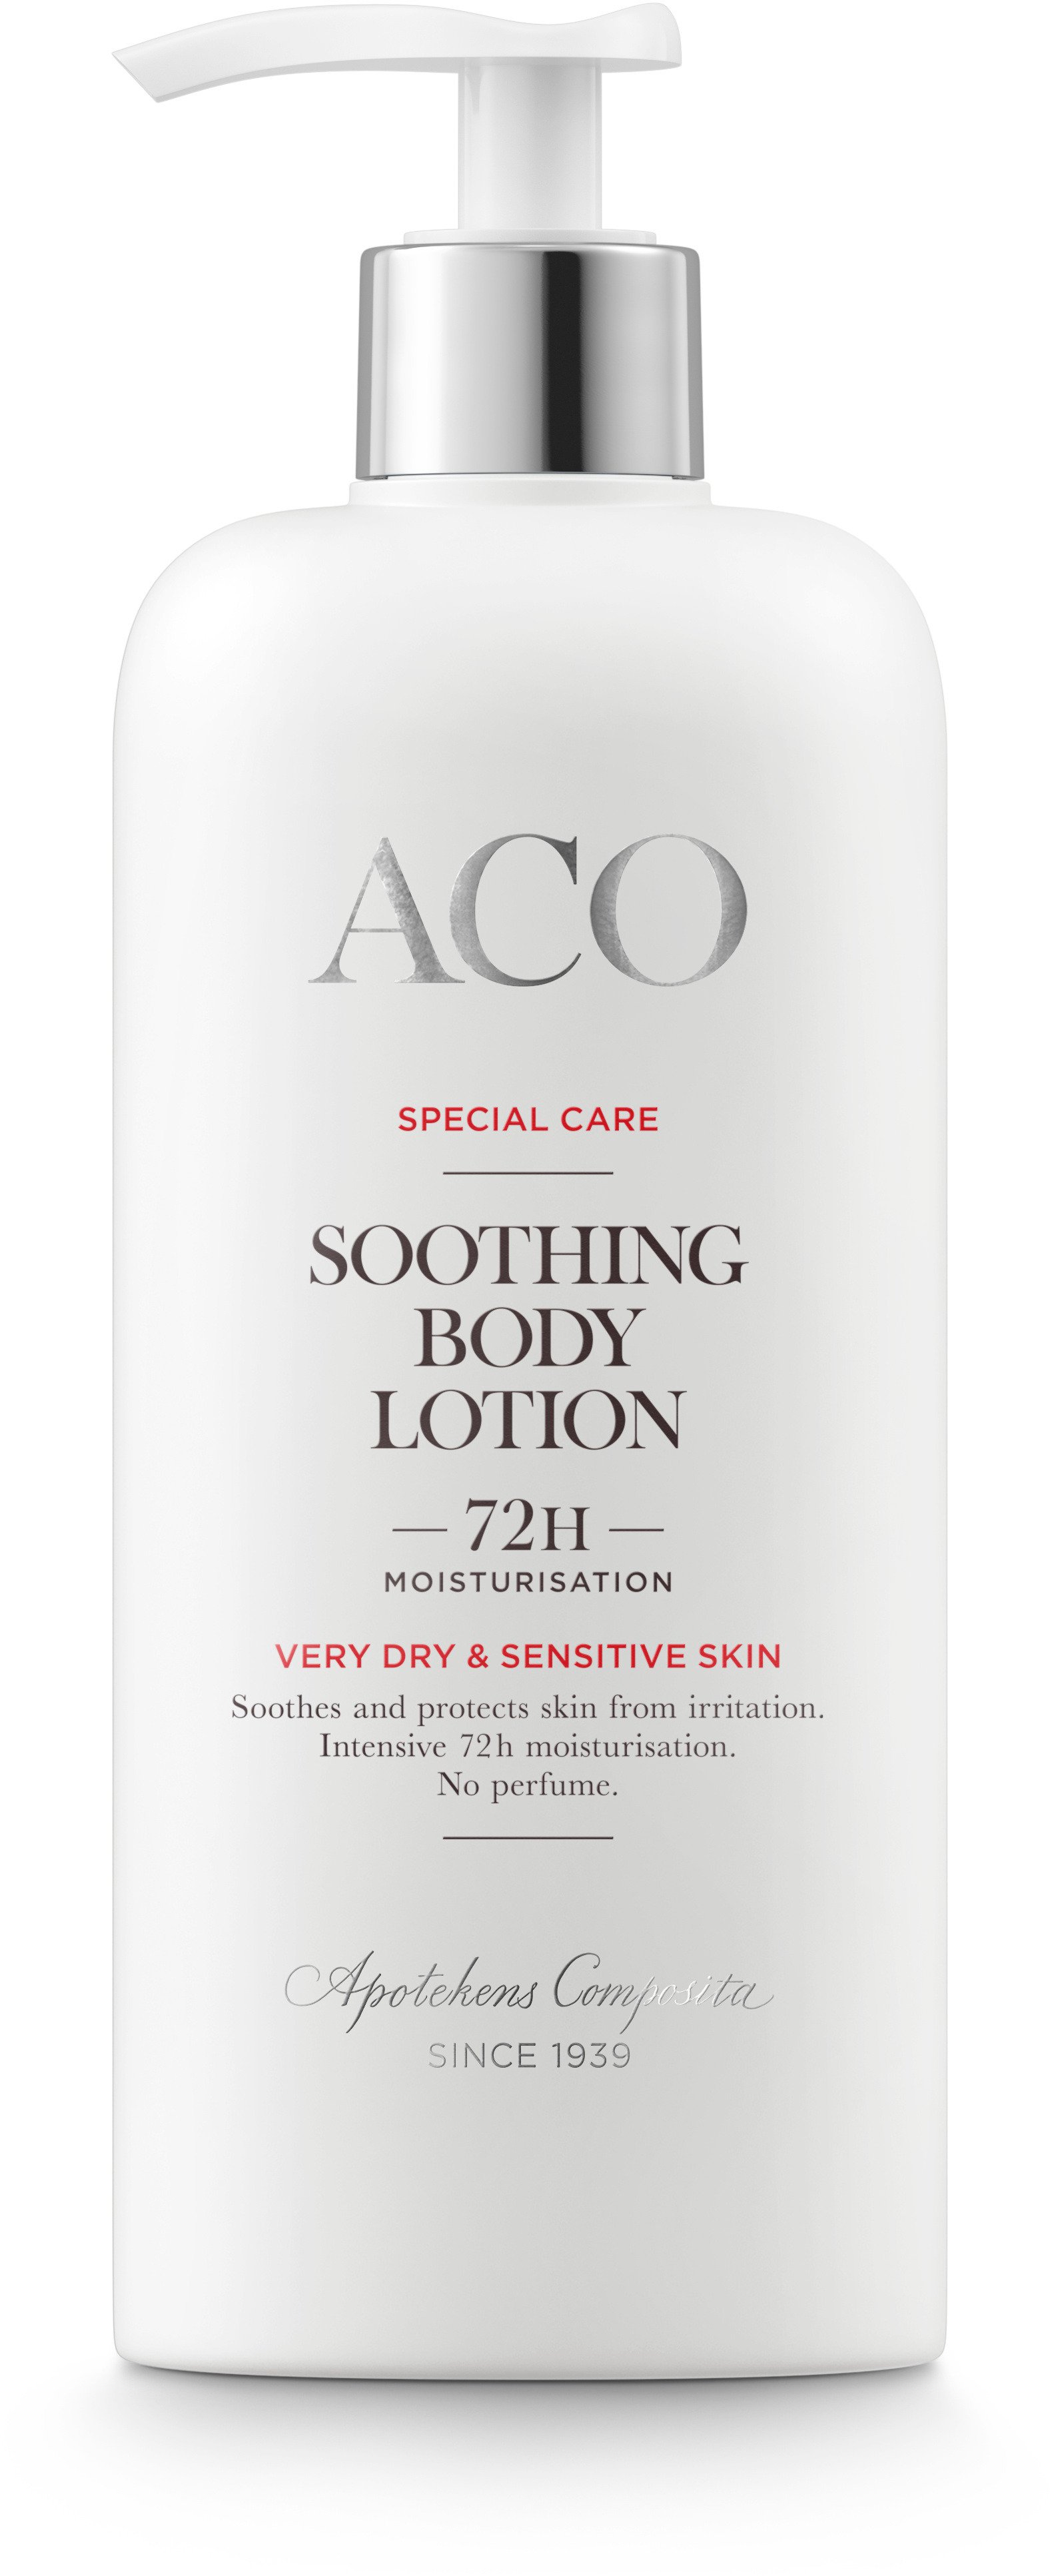 Aco Special Care Soothing Body Lotion Hudlotion 300 ml